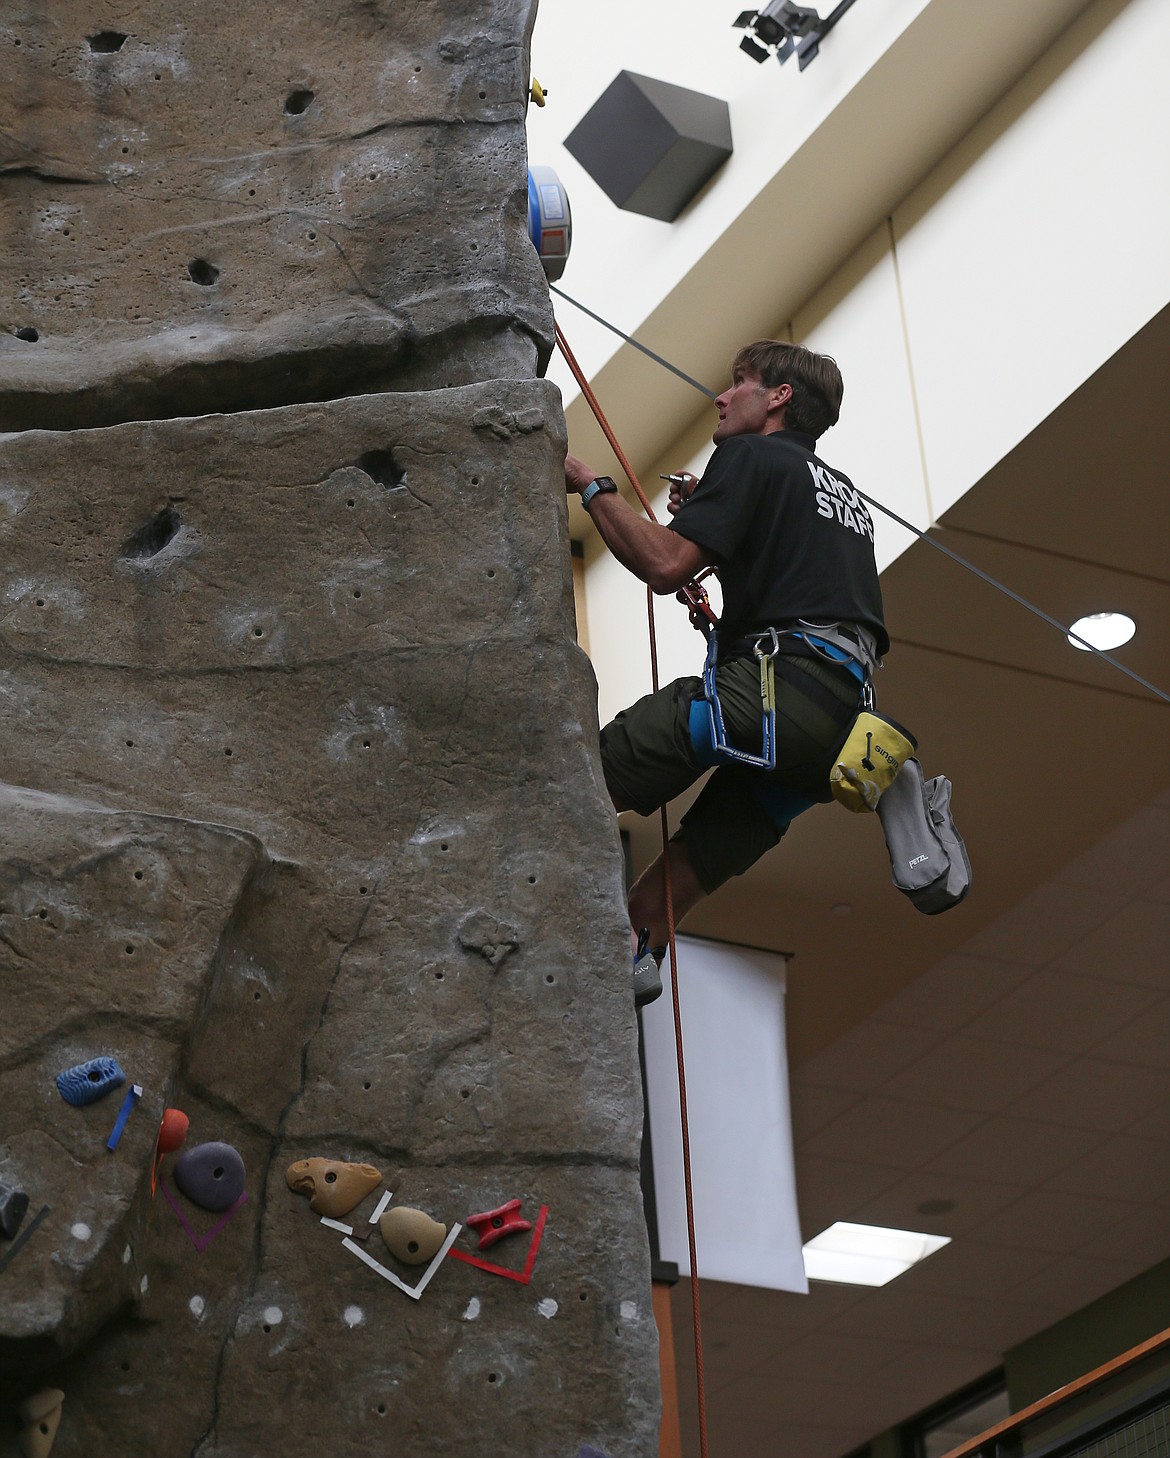 Kroc Center employee Dan Shaw conducts maintenance on the climbing wall on May 13. The Kroc celebrated its 12th anniversary on May 11 and continues to expand membership and programming as life returns to normal.